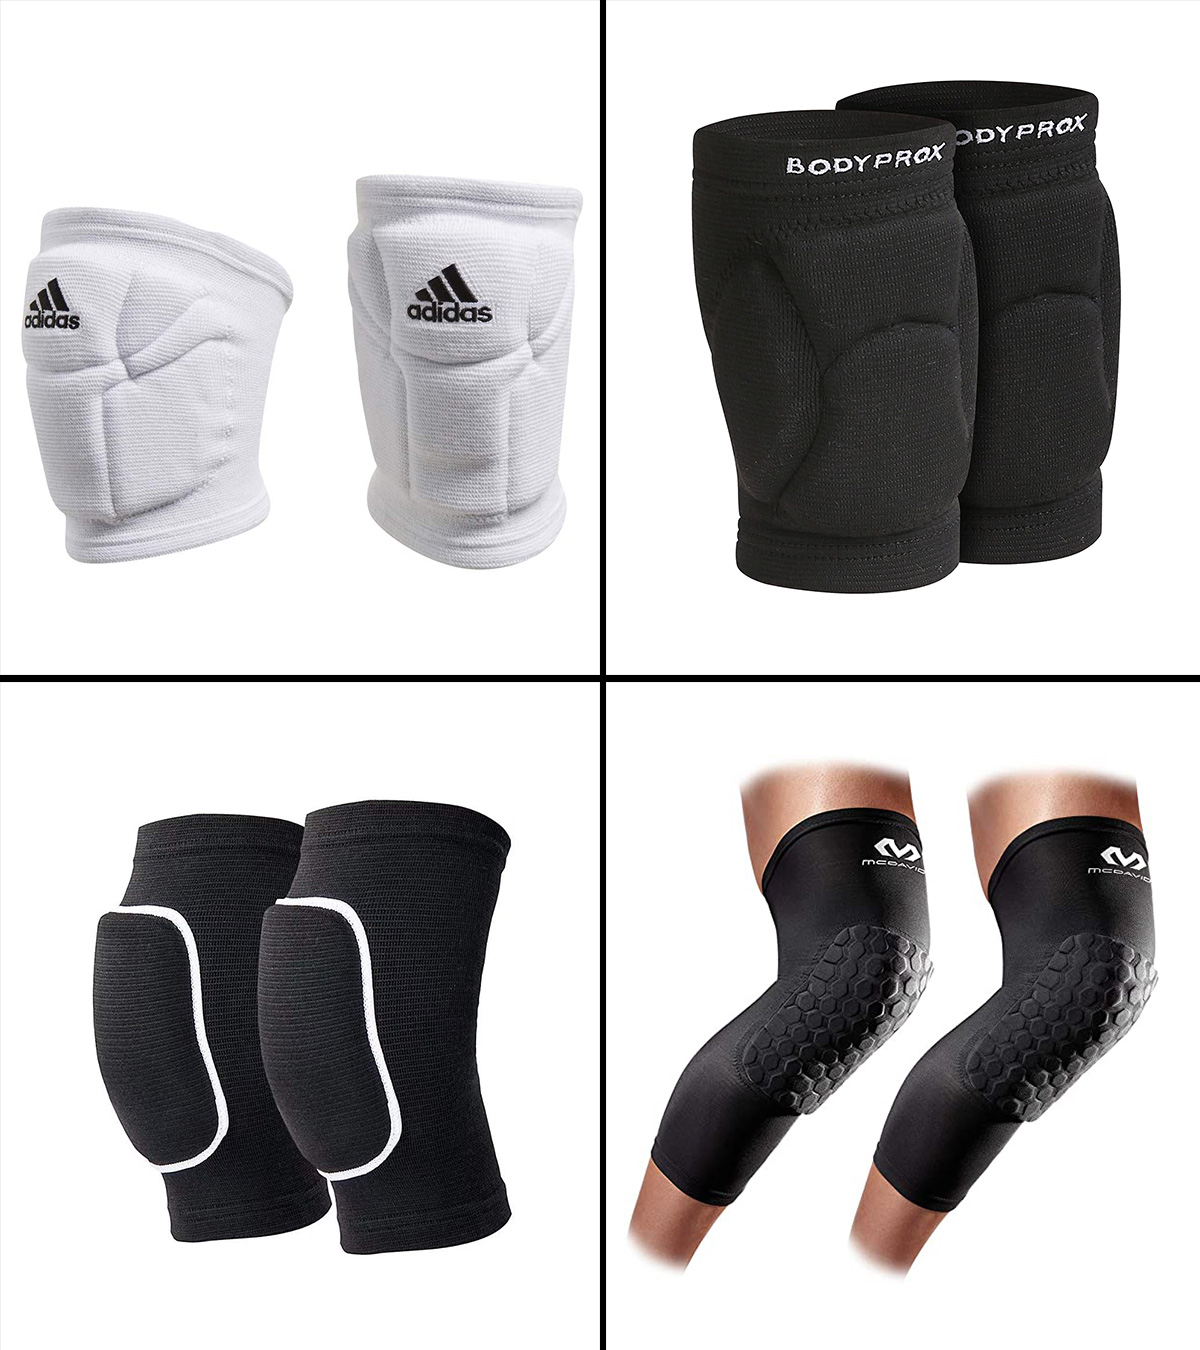 Adams Injection Foam Volleyball Knee Guards-One Size 